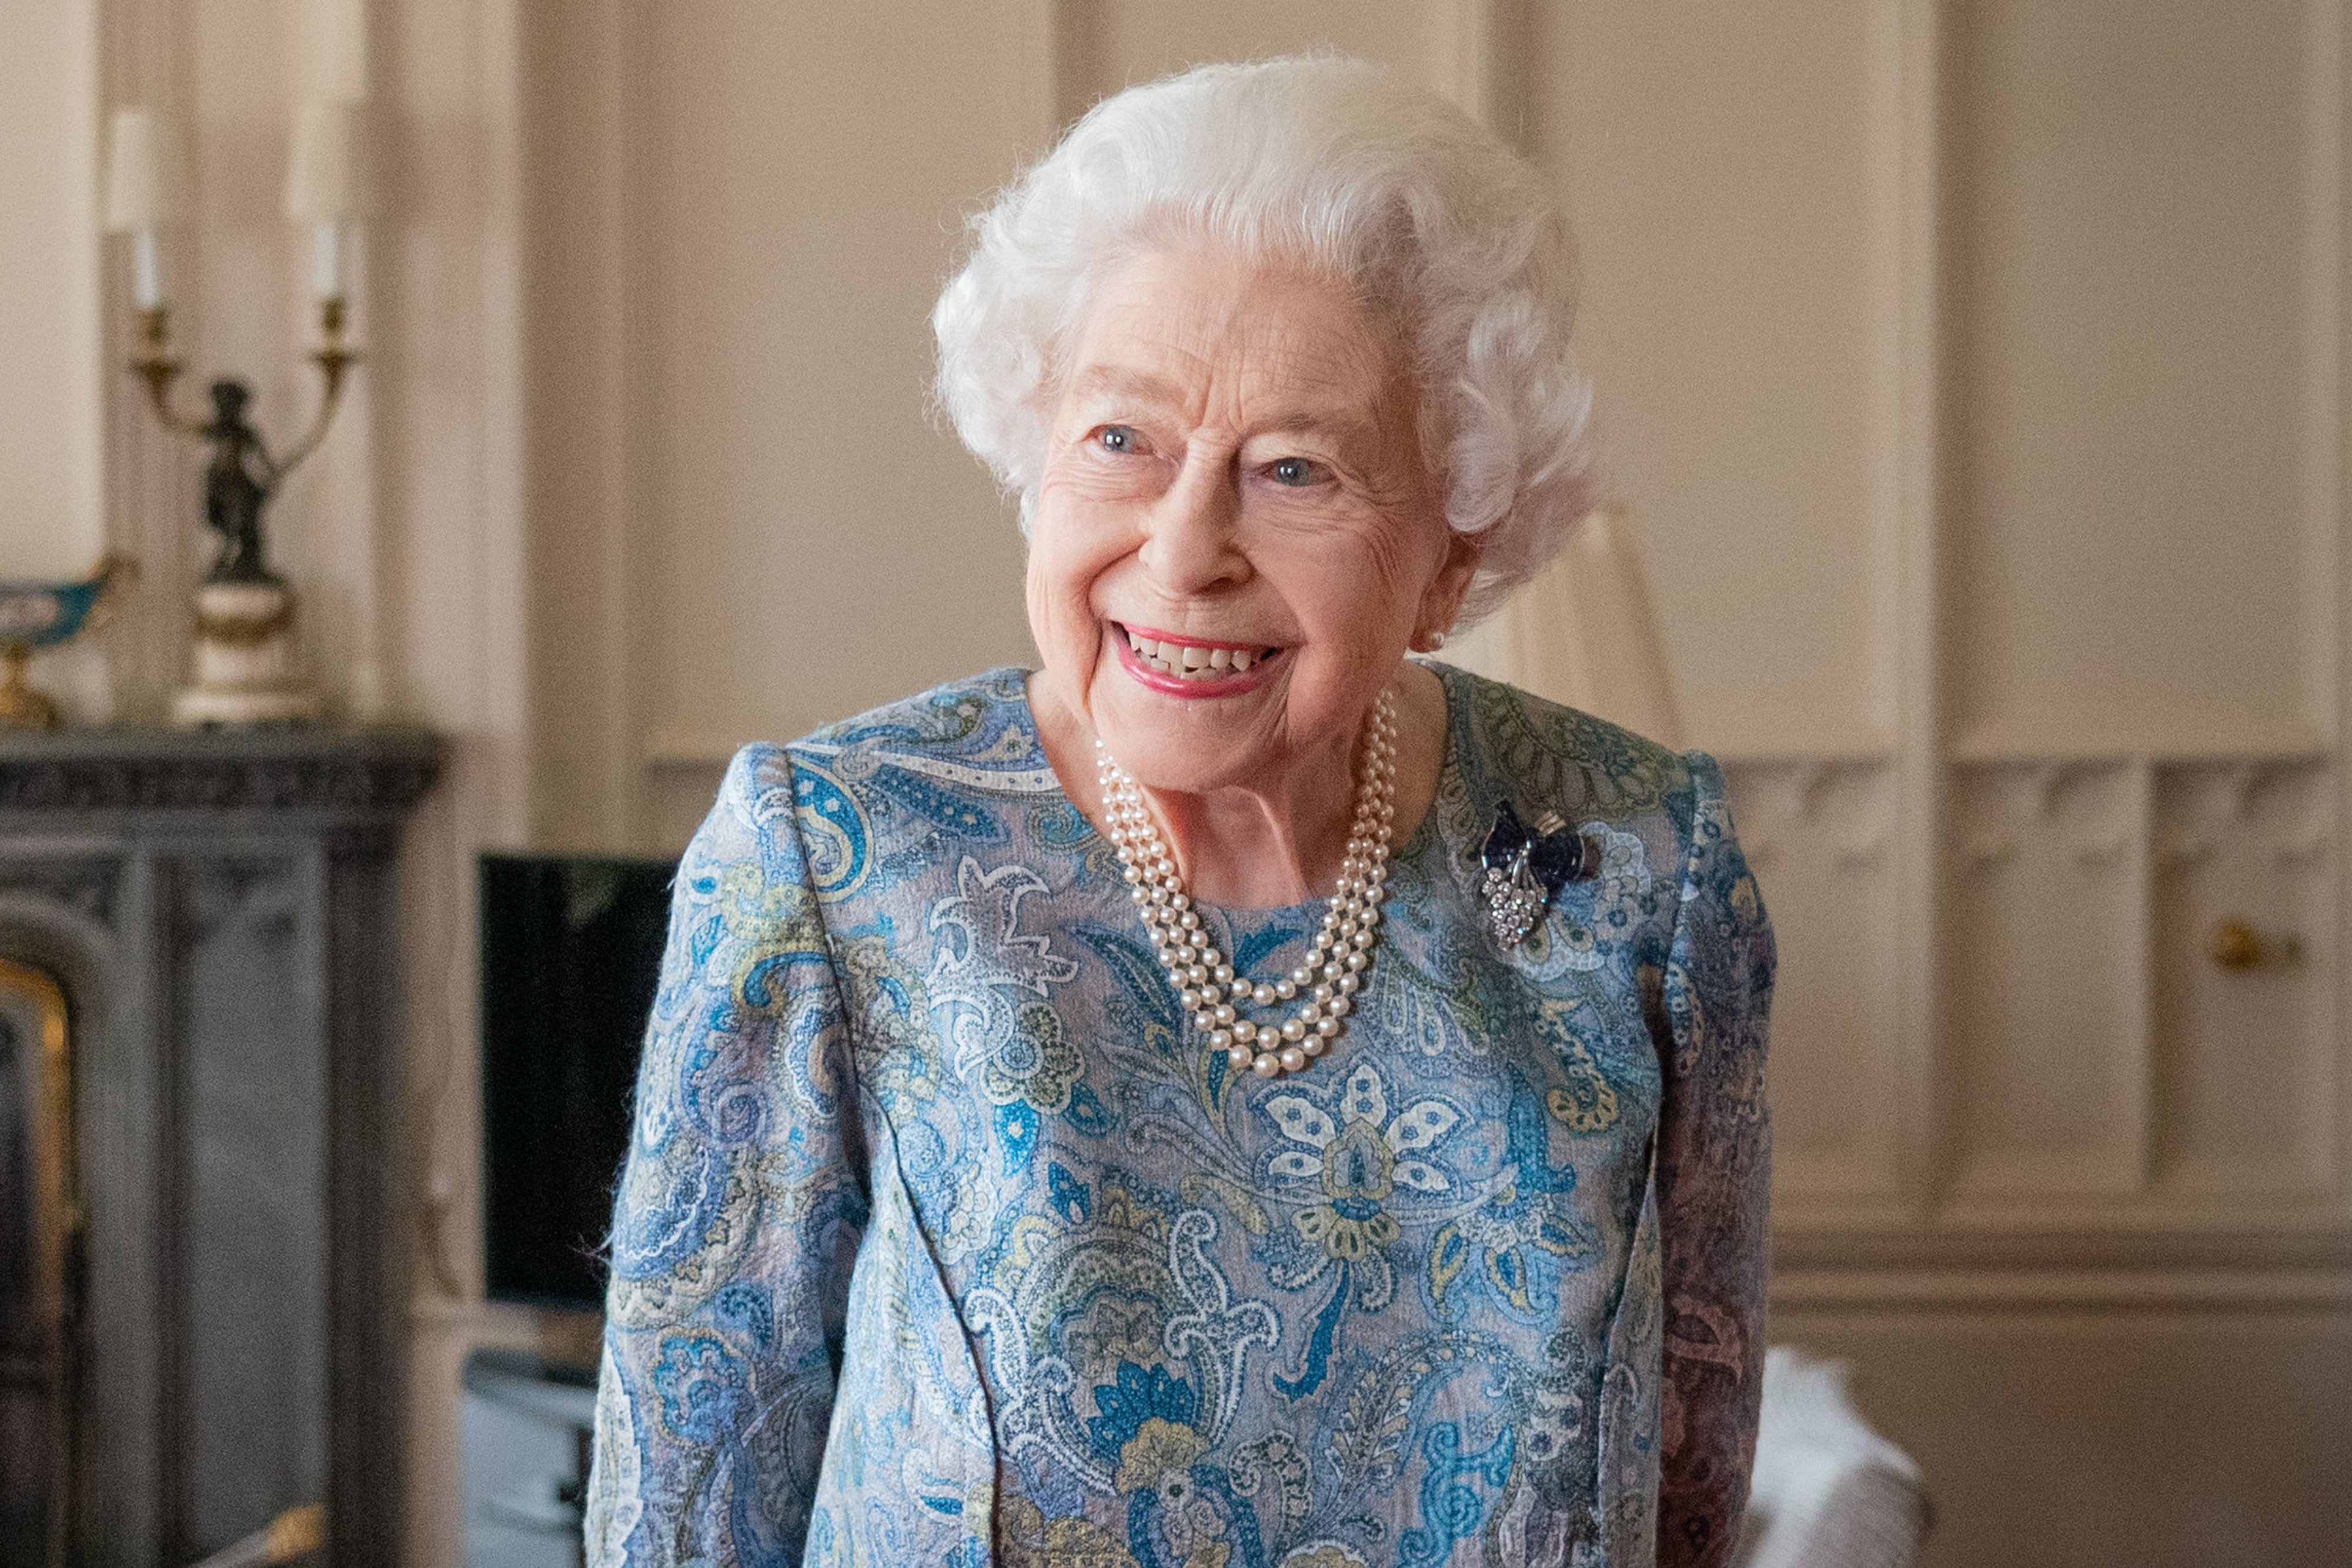 Queen Elizabeth II attends an audience with the President of Switzerland Ignazio Cassis (Not pictured) at Windsor Castle on April 28, 2022 in Windsor, England. | Source: Getty Images